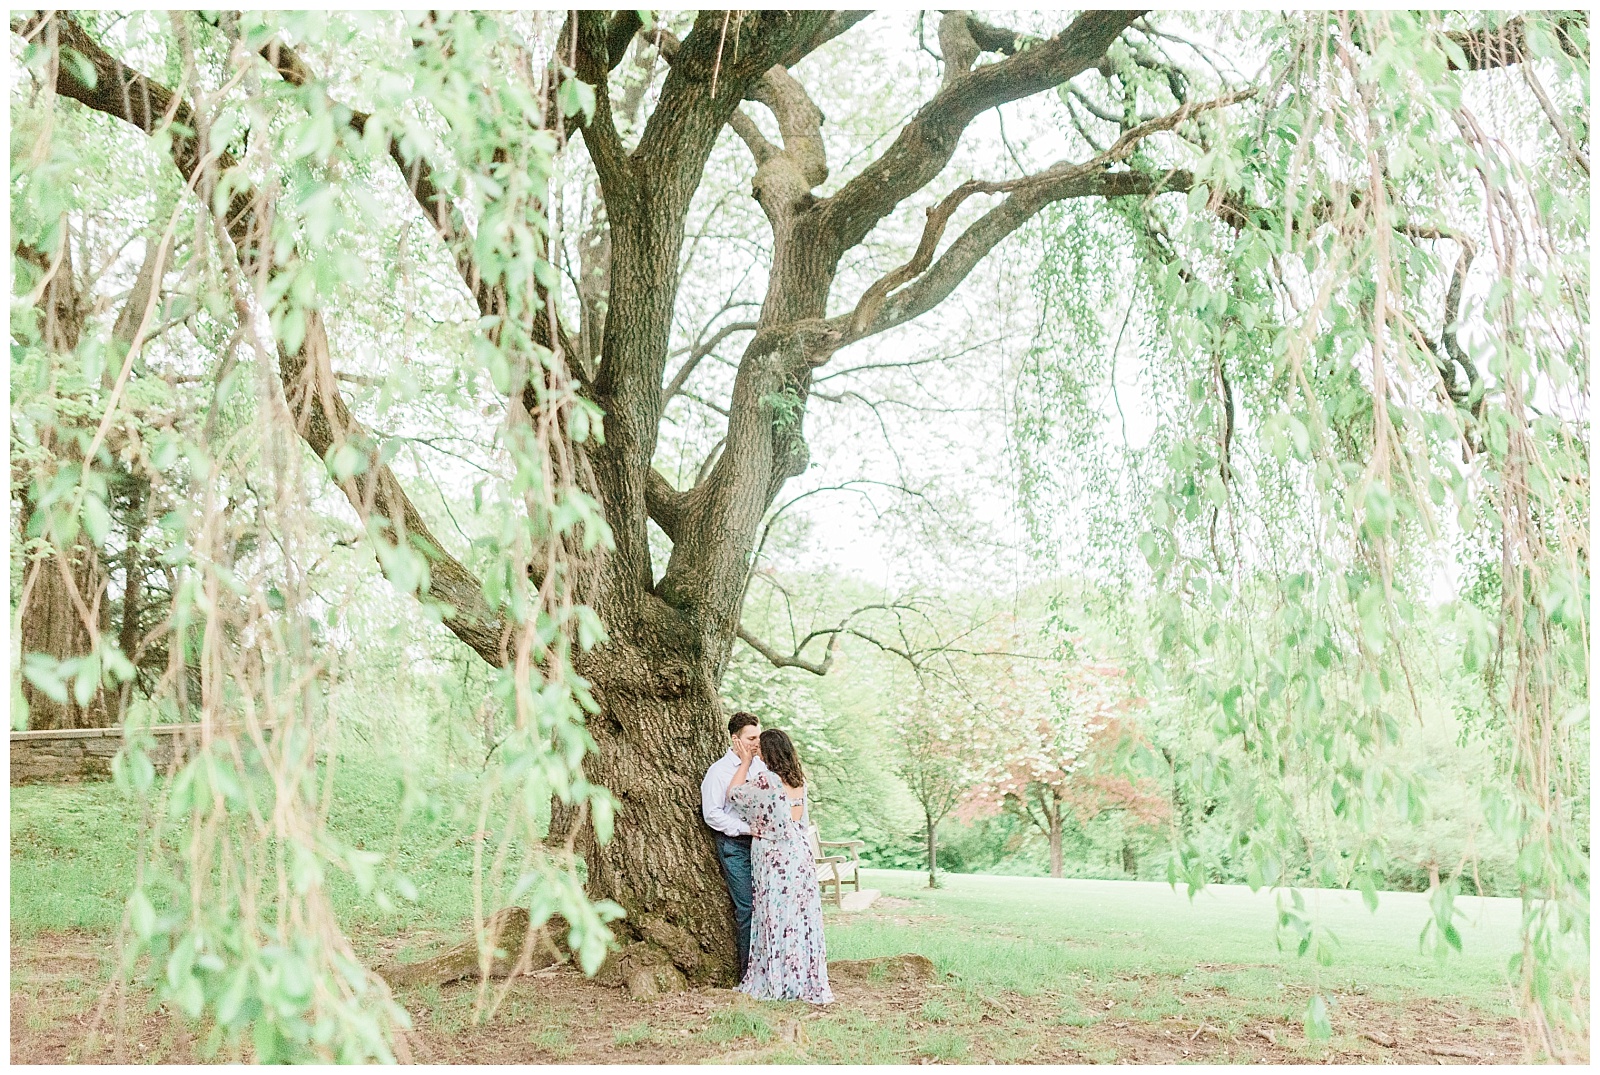 A couple kisses beneath a willow tree.